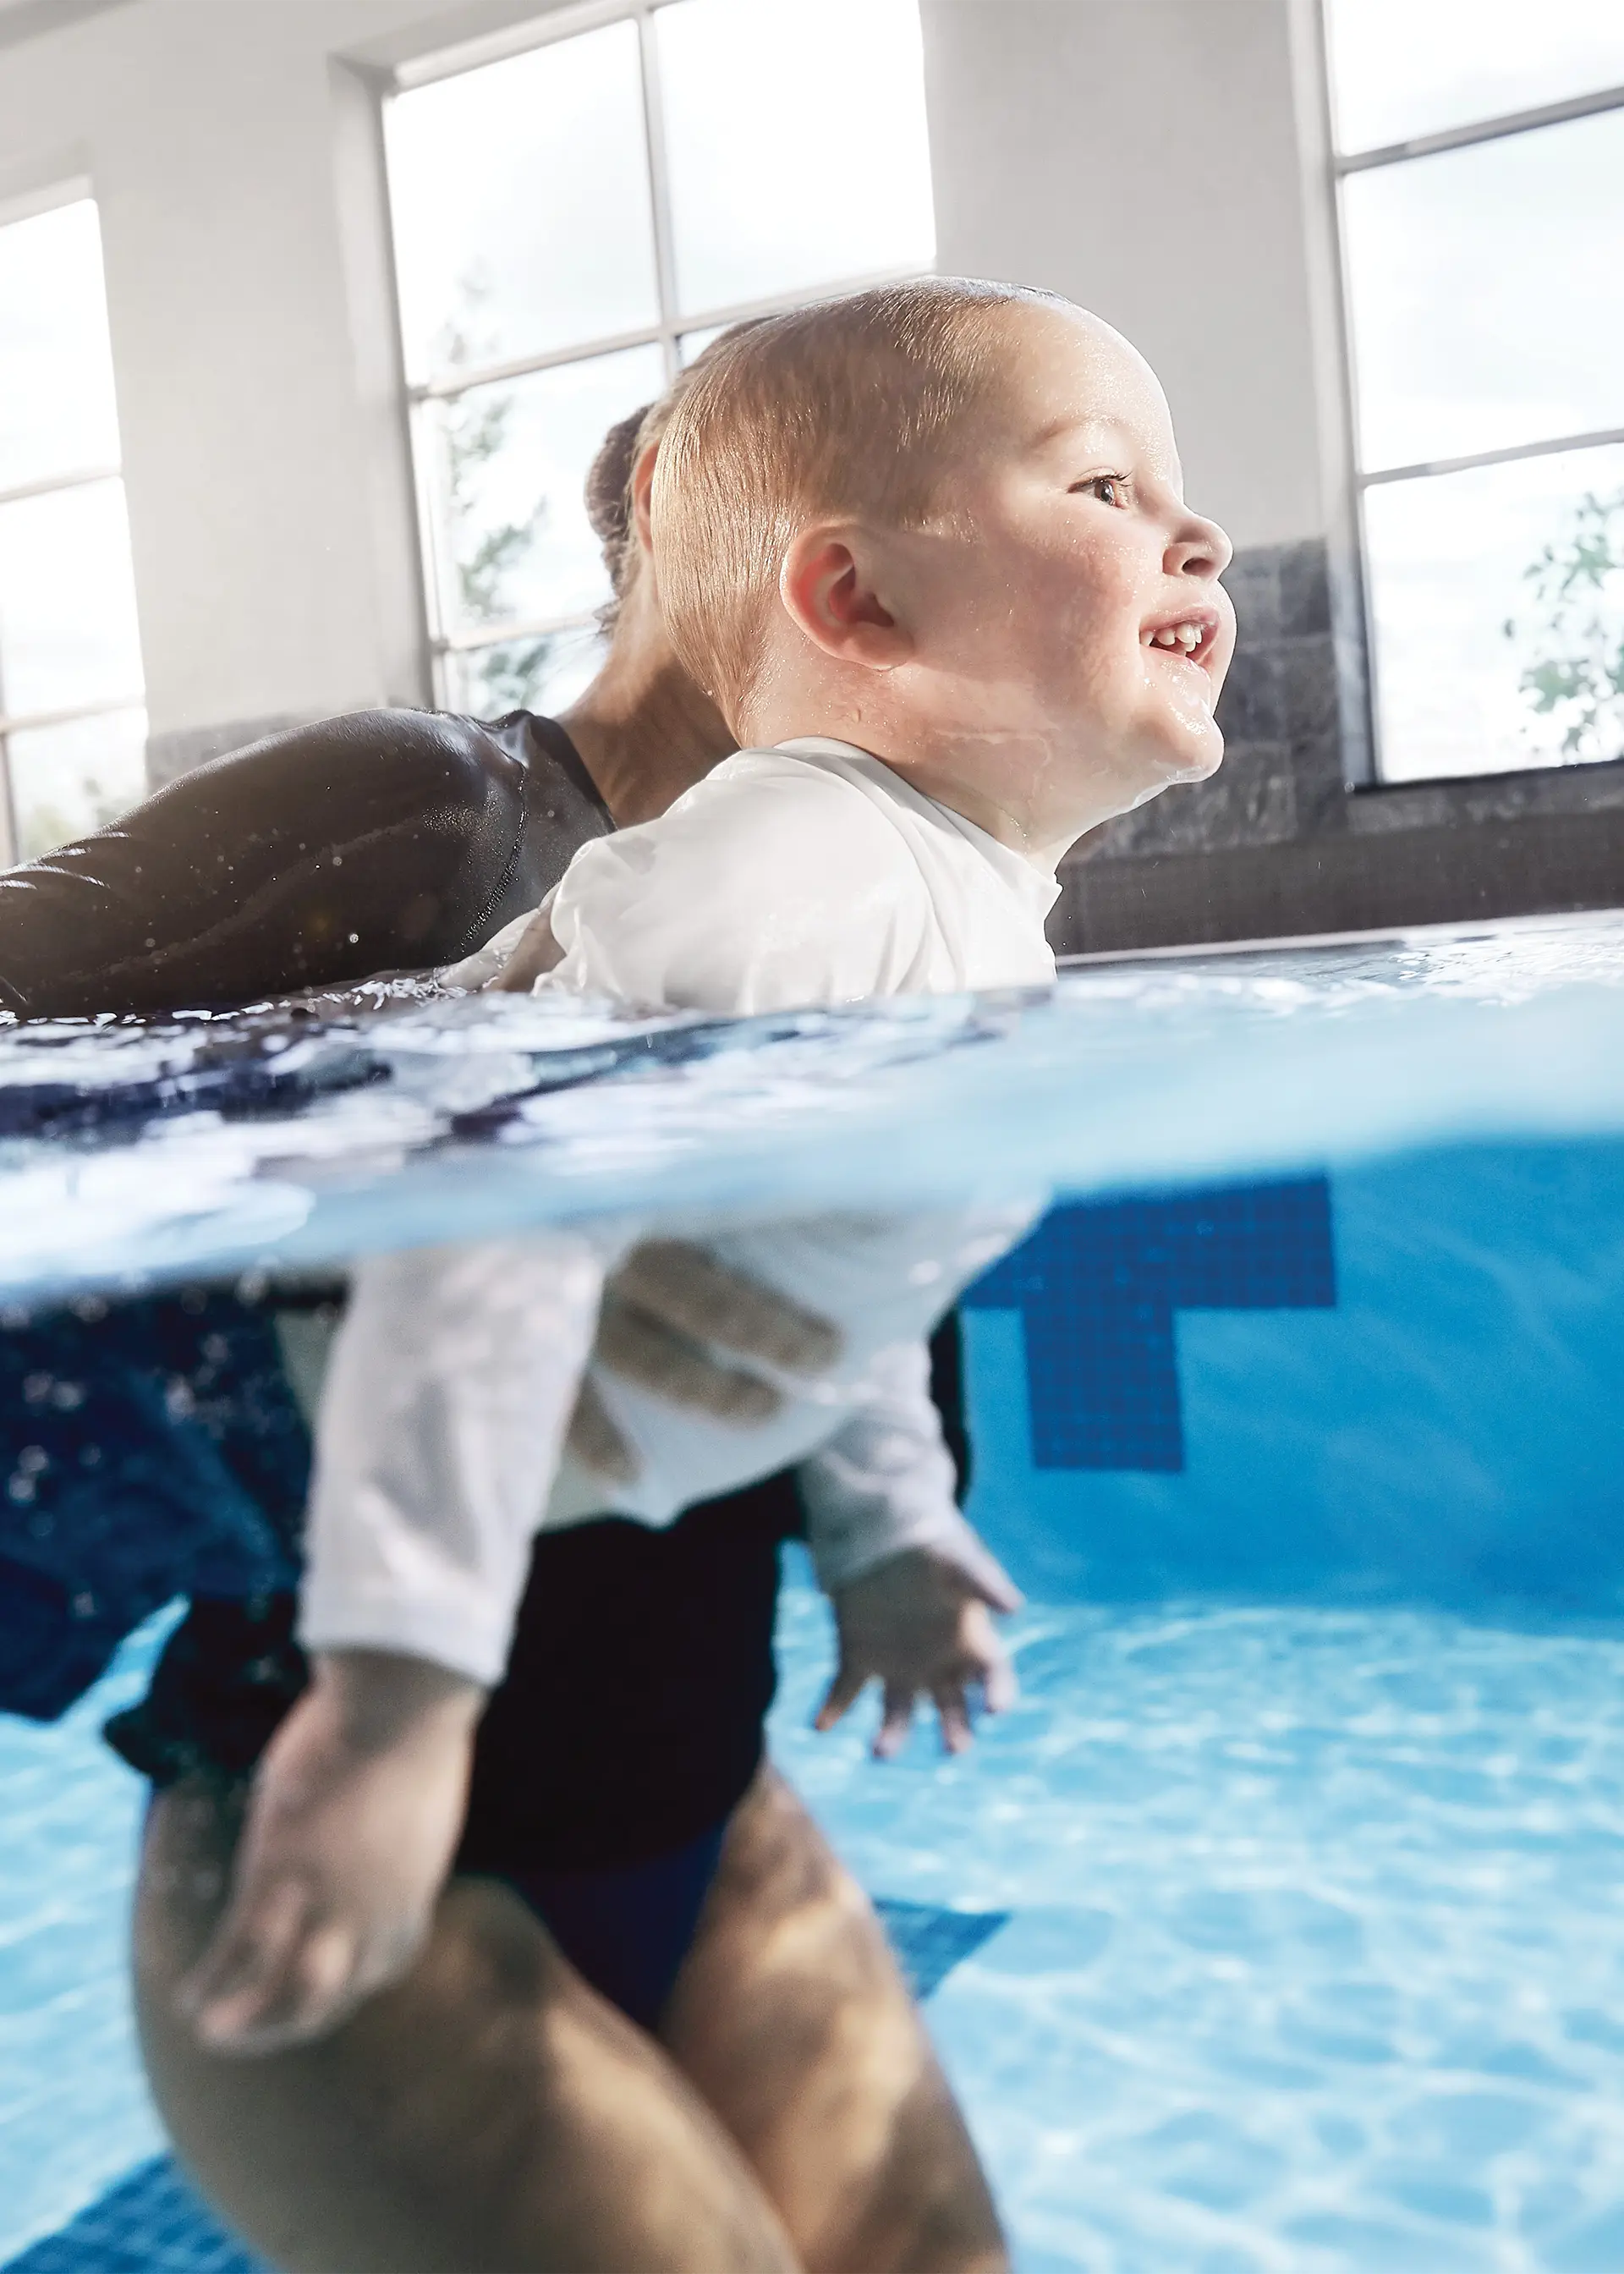 A child swimming in an indoor pool assisted by an adult.